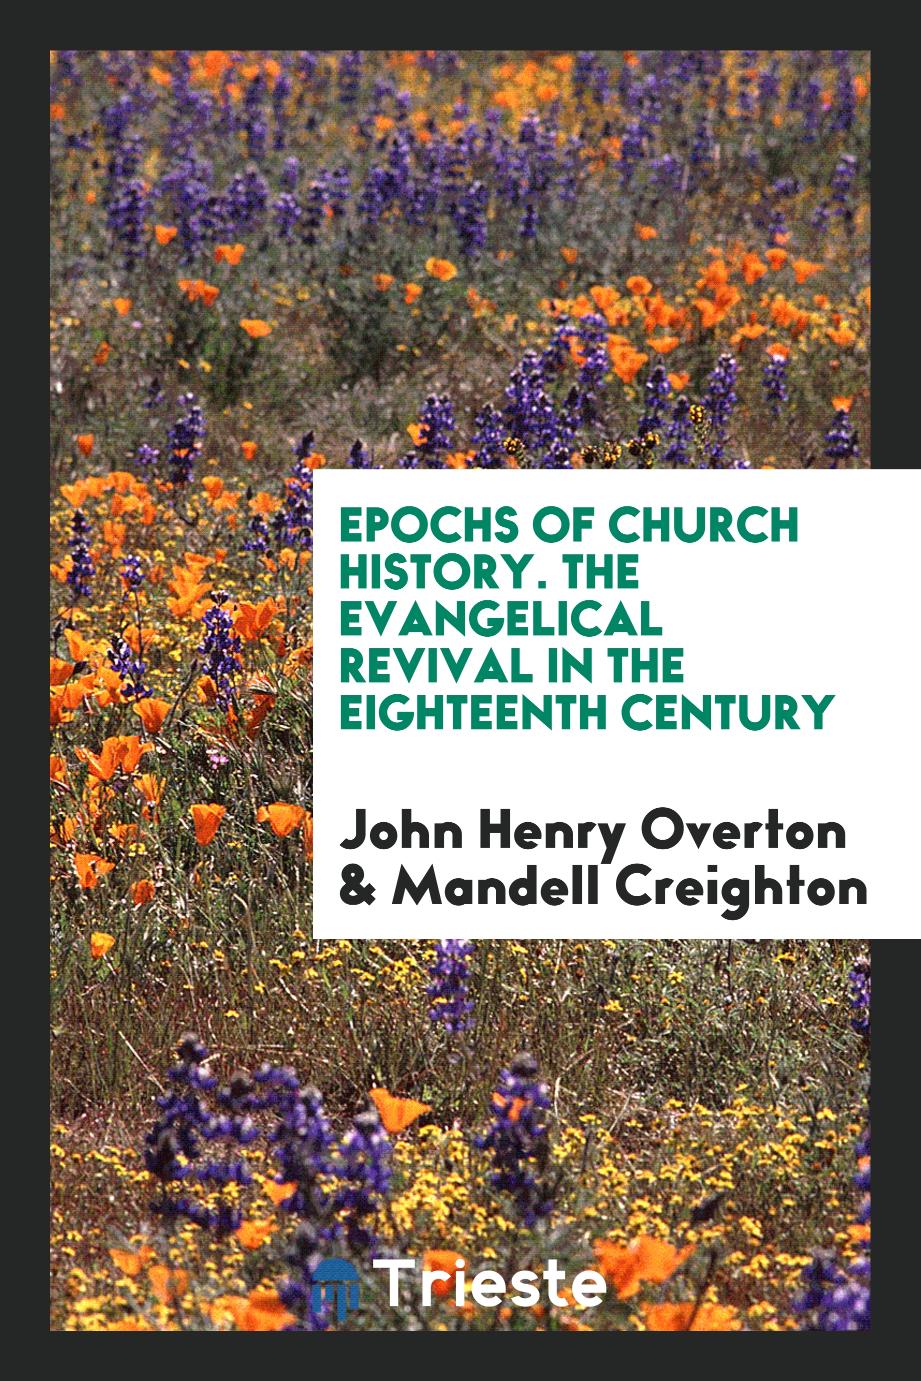 Epochs of Church History. The Evangelical Revival in the Eighteenth Century